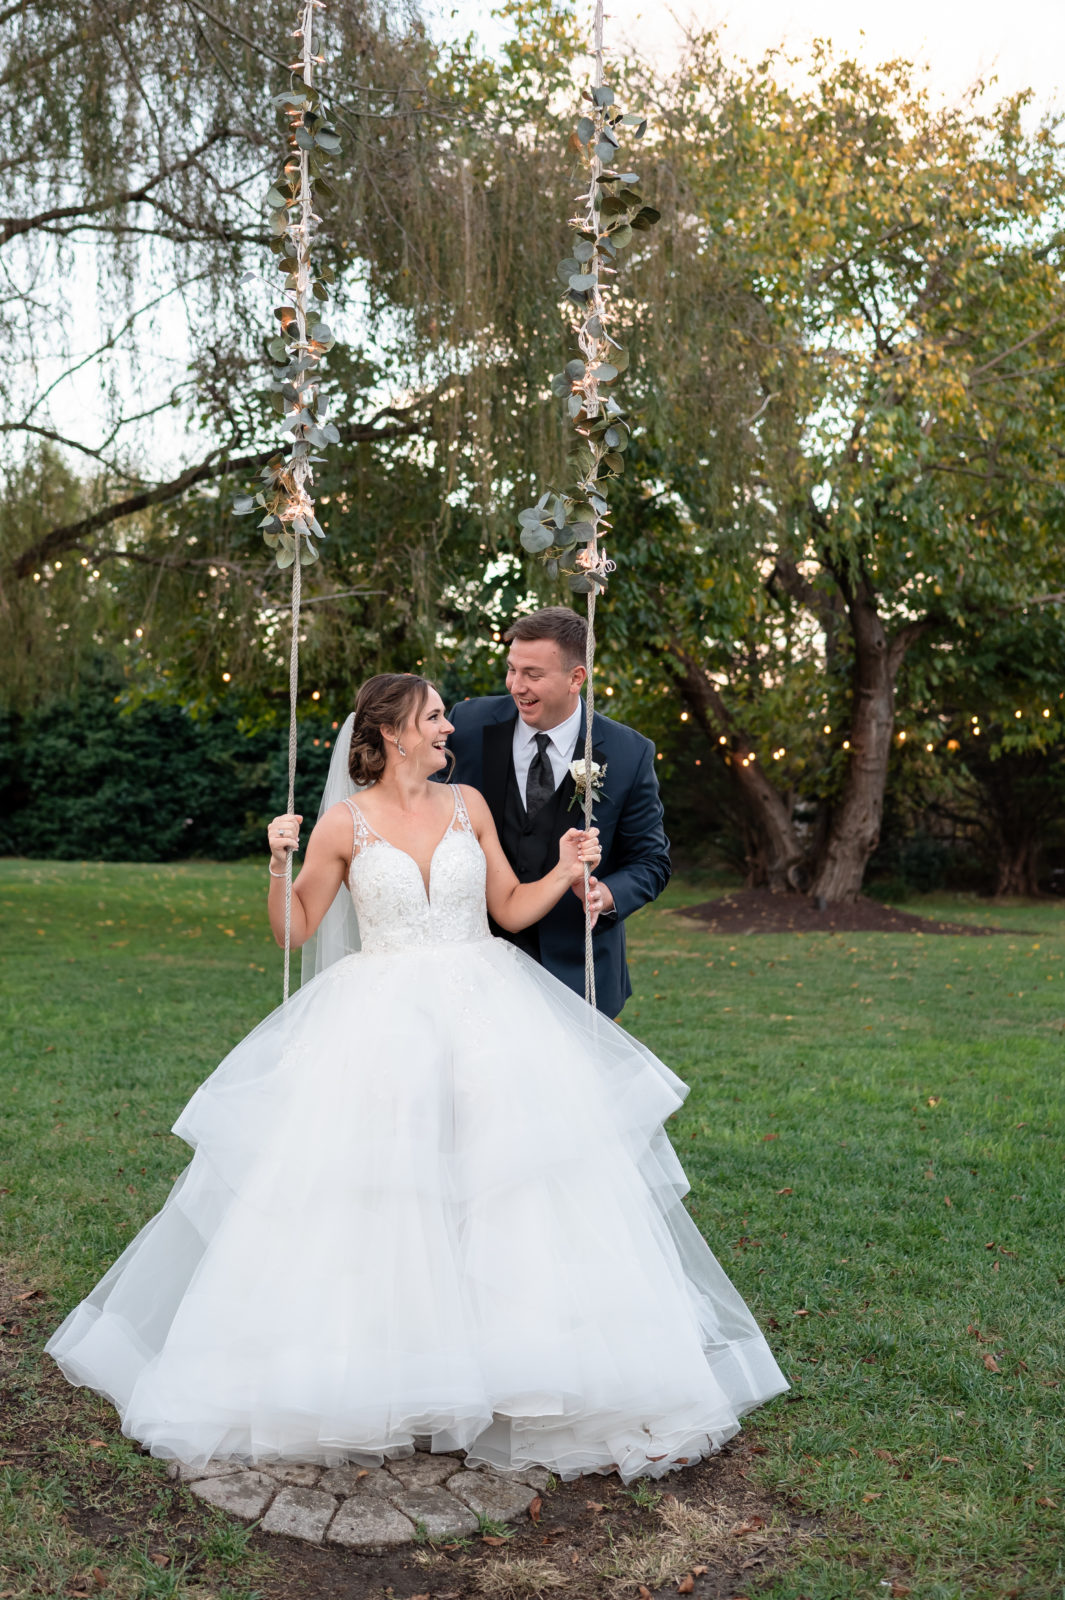 Bride and Groom photo with groom pushing bride on swing